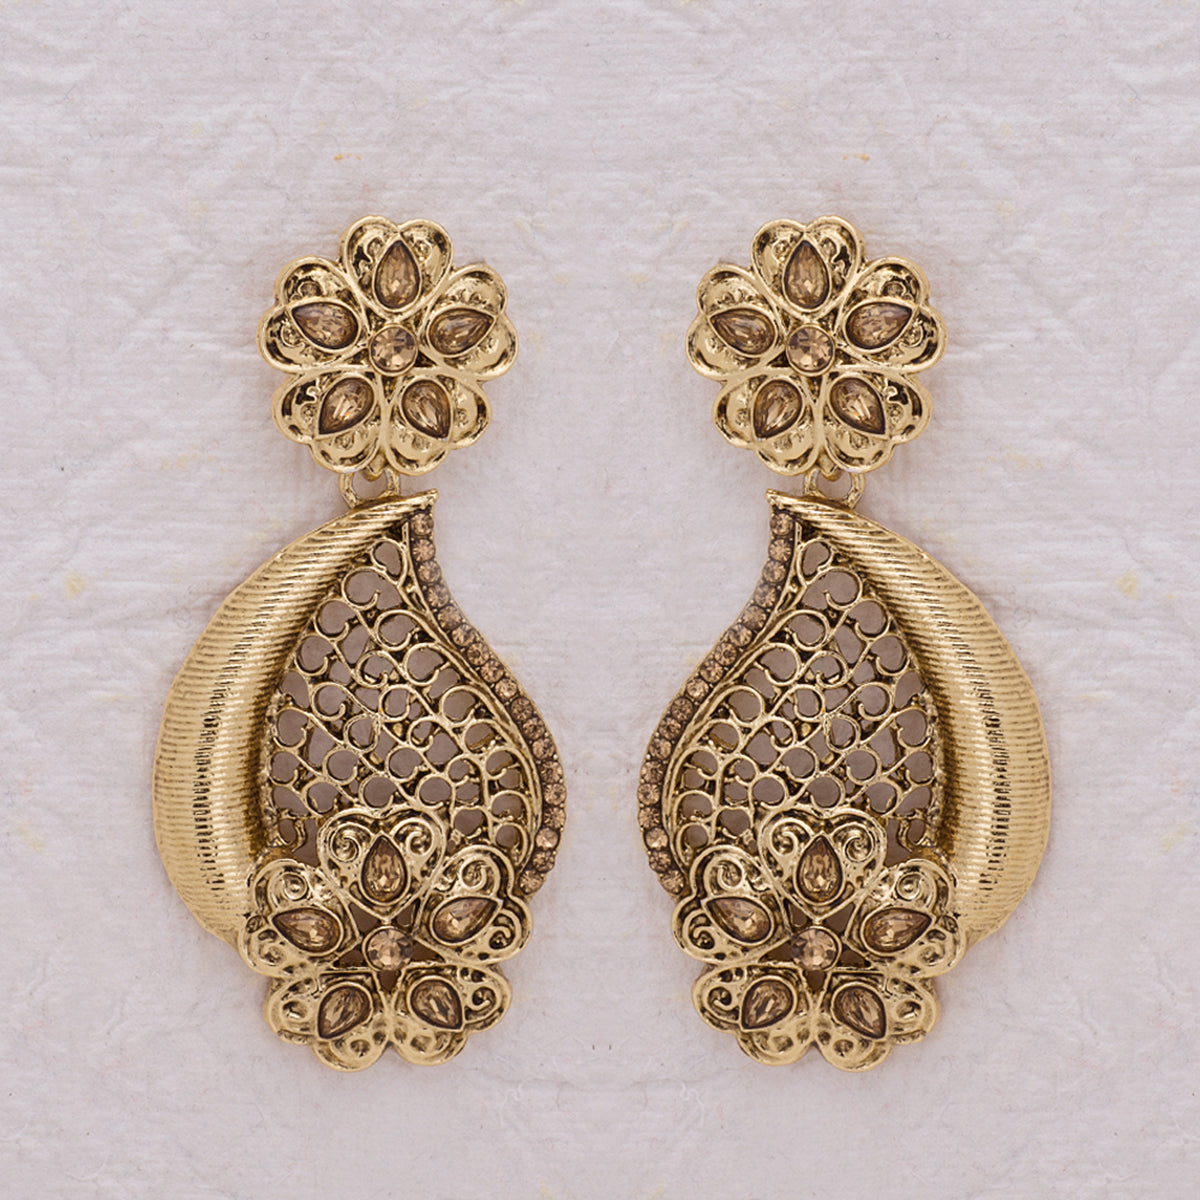 Artistic Paisley Earrings with Floral Motifs